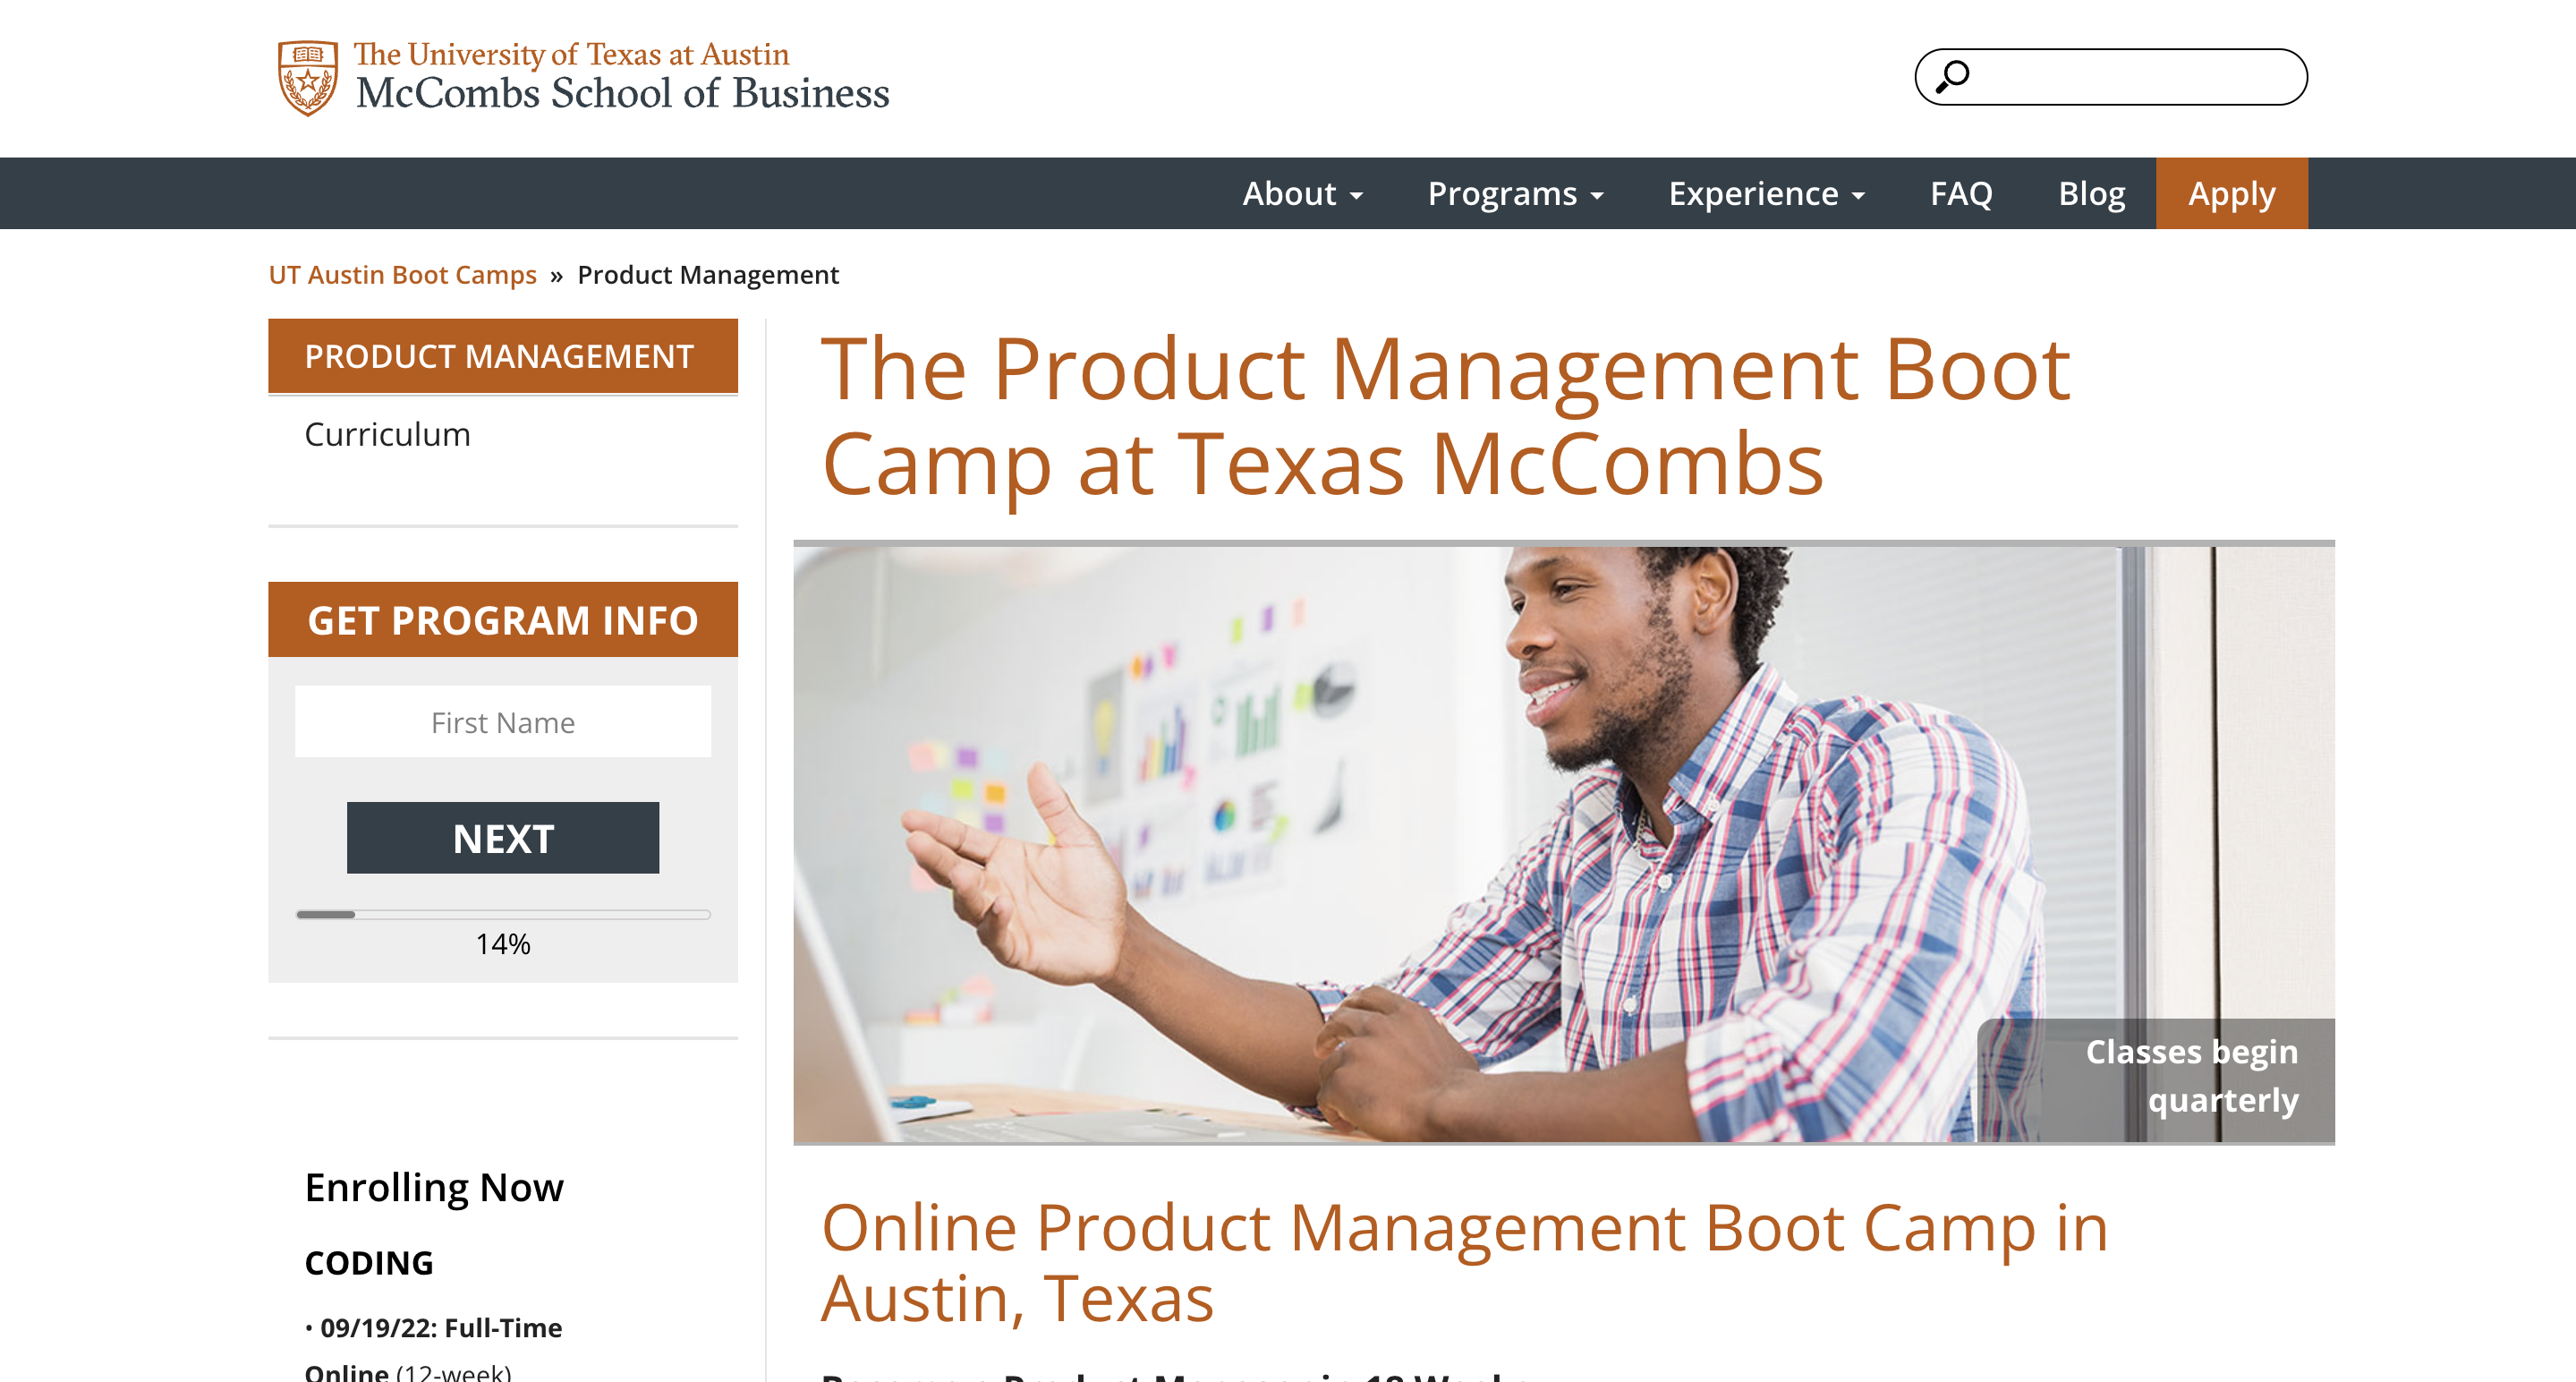 The Product Management Boot Camp at the University of Texas at Austin